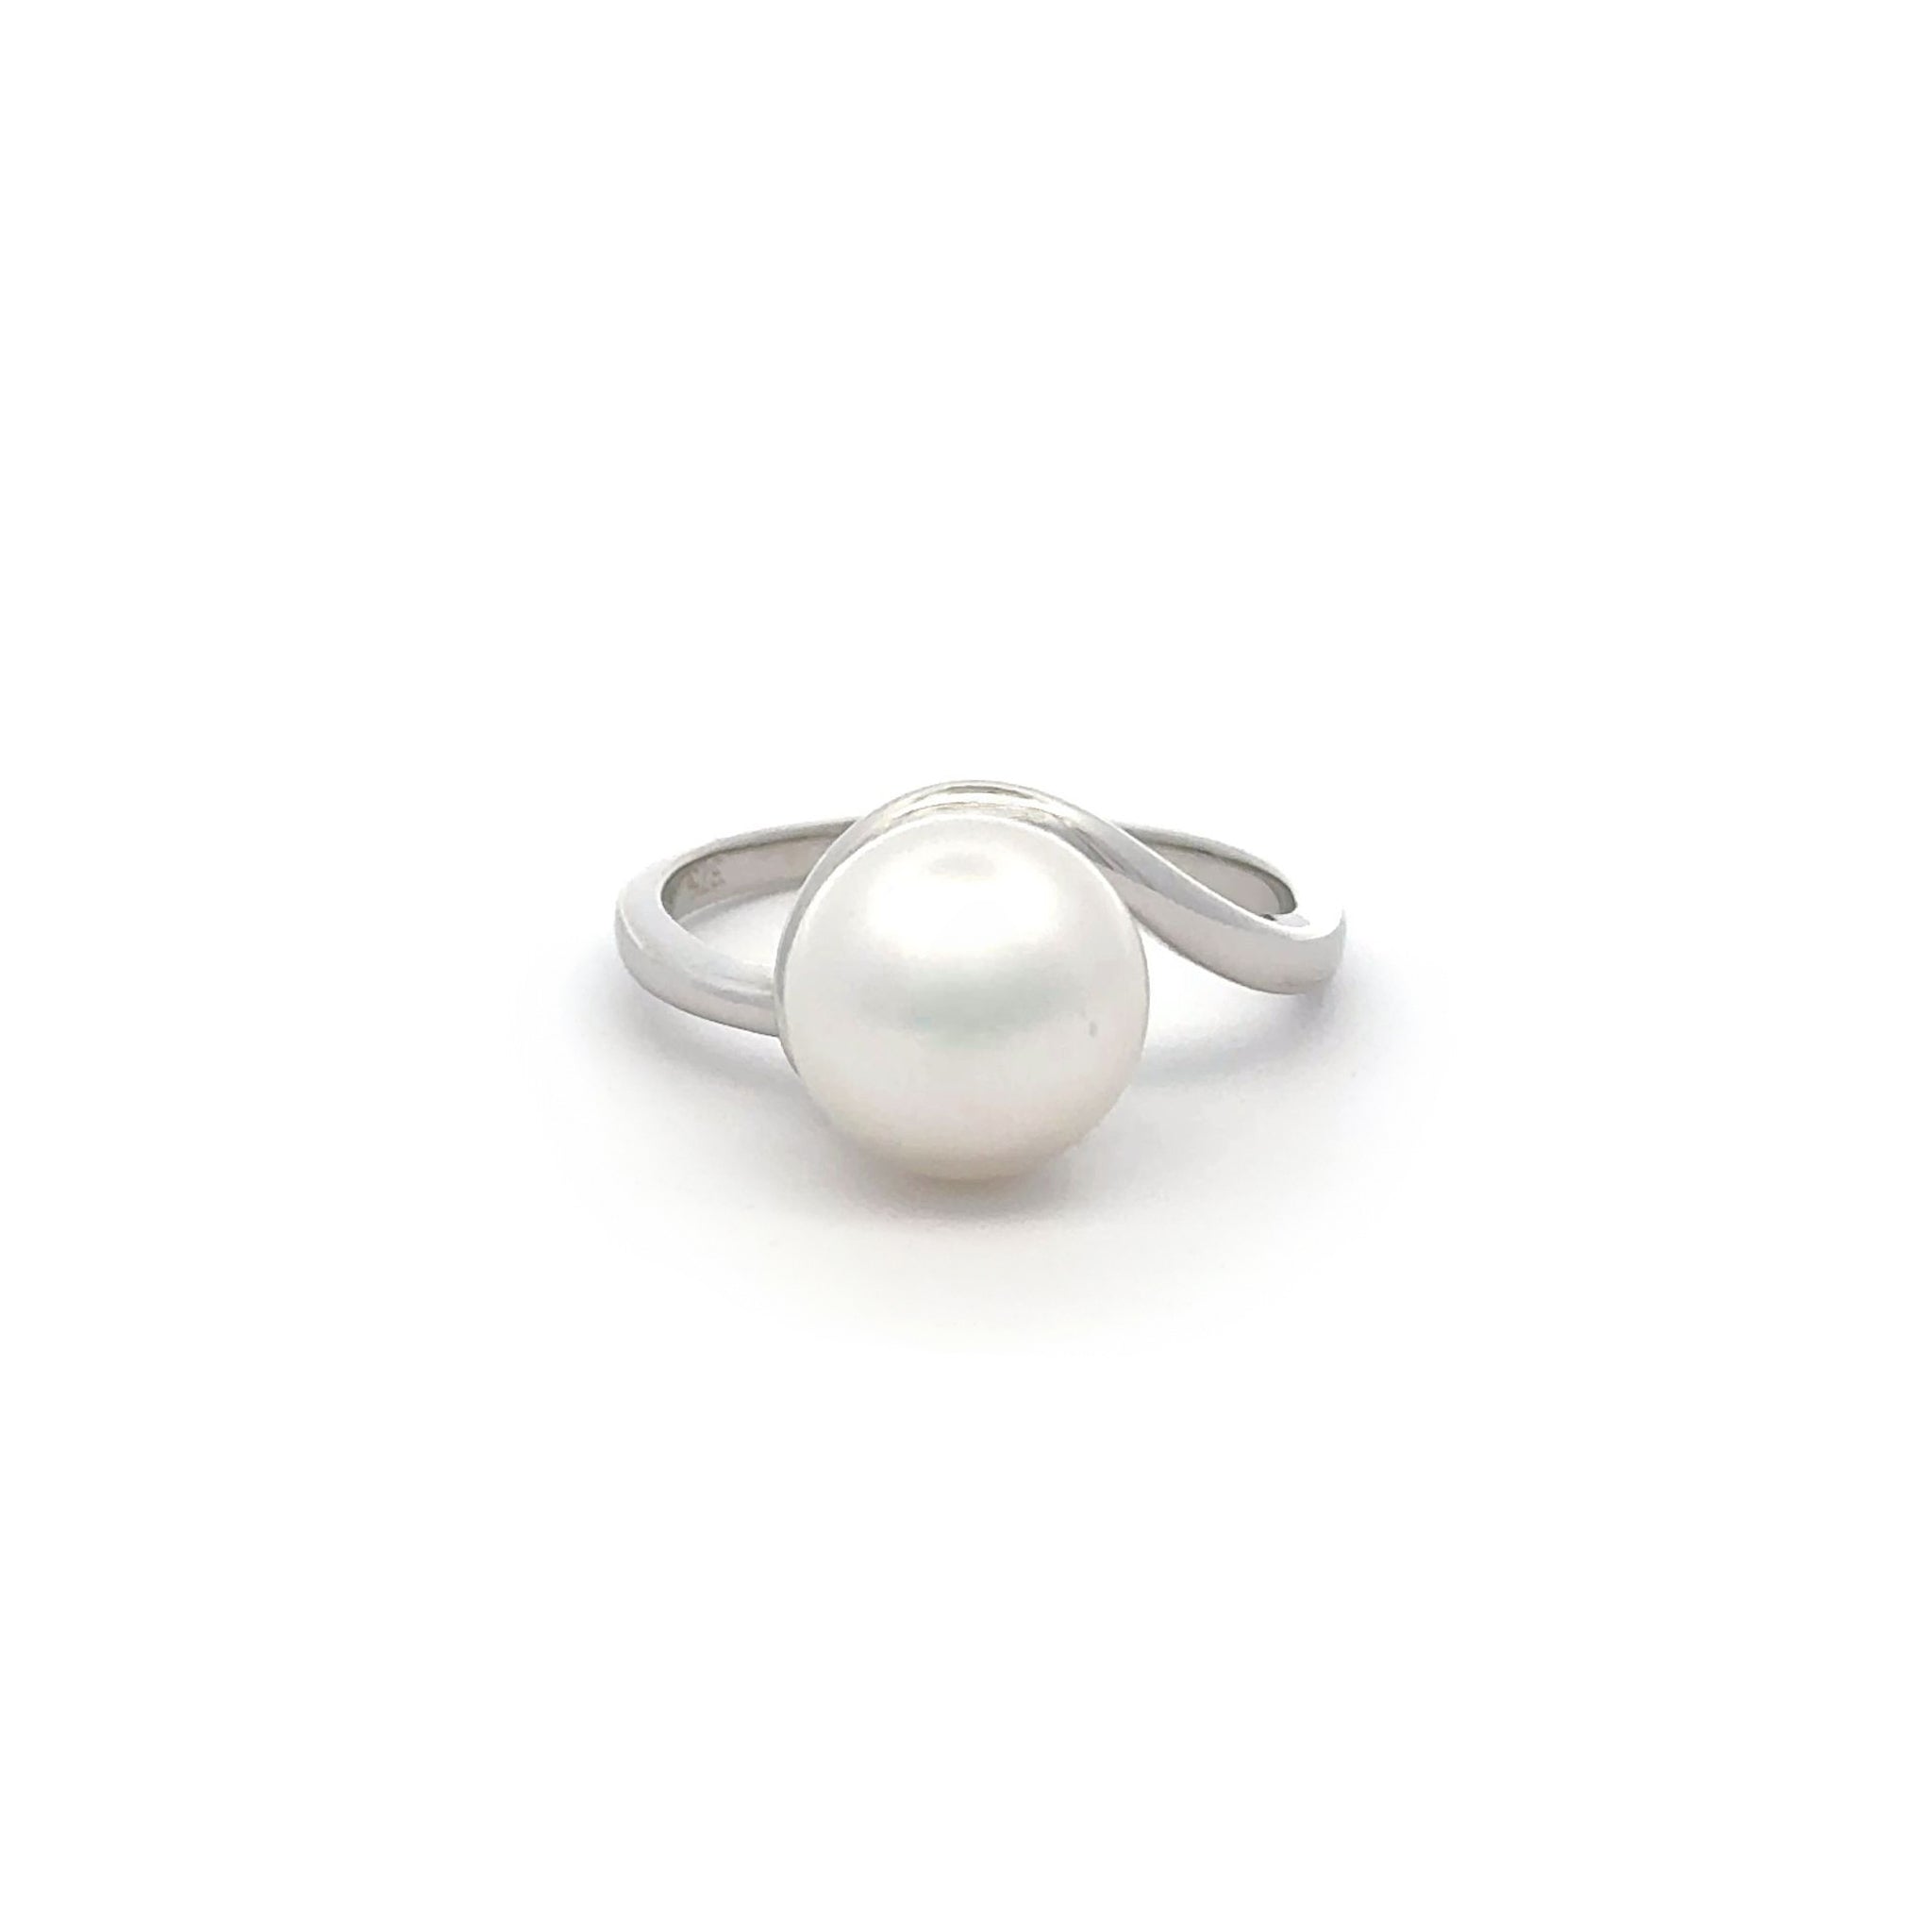 9K White Gold Australian South Sea Cultured 9 -10mm Pearl Ring